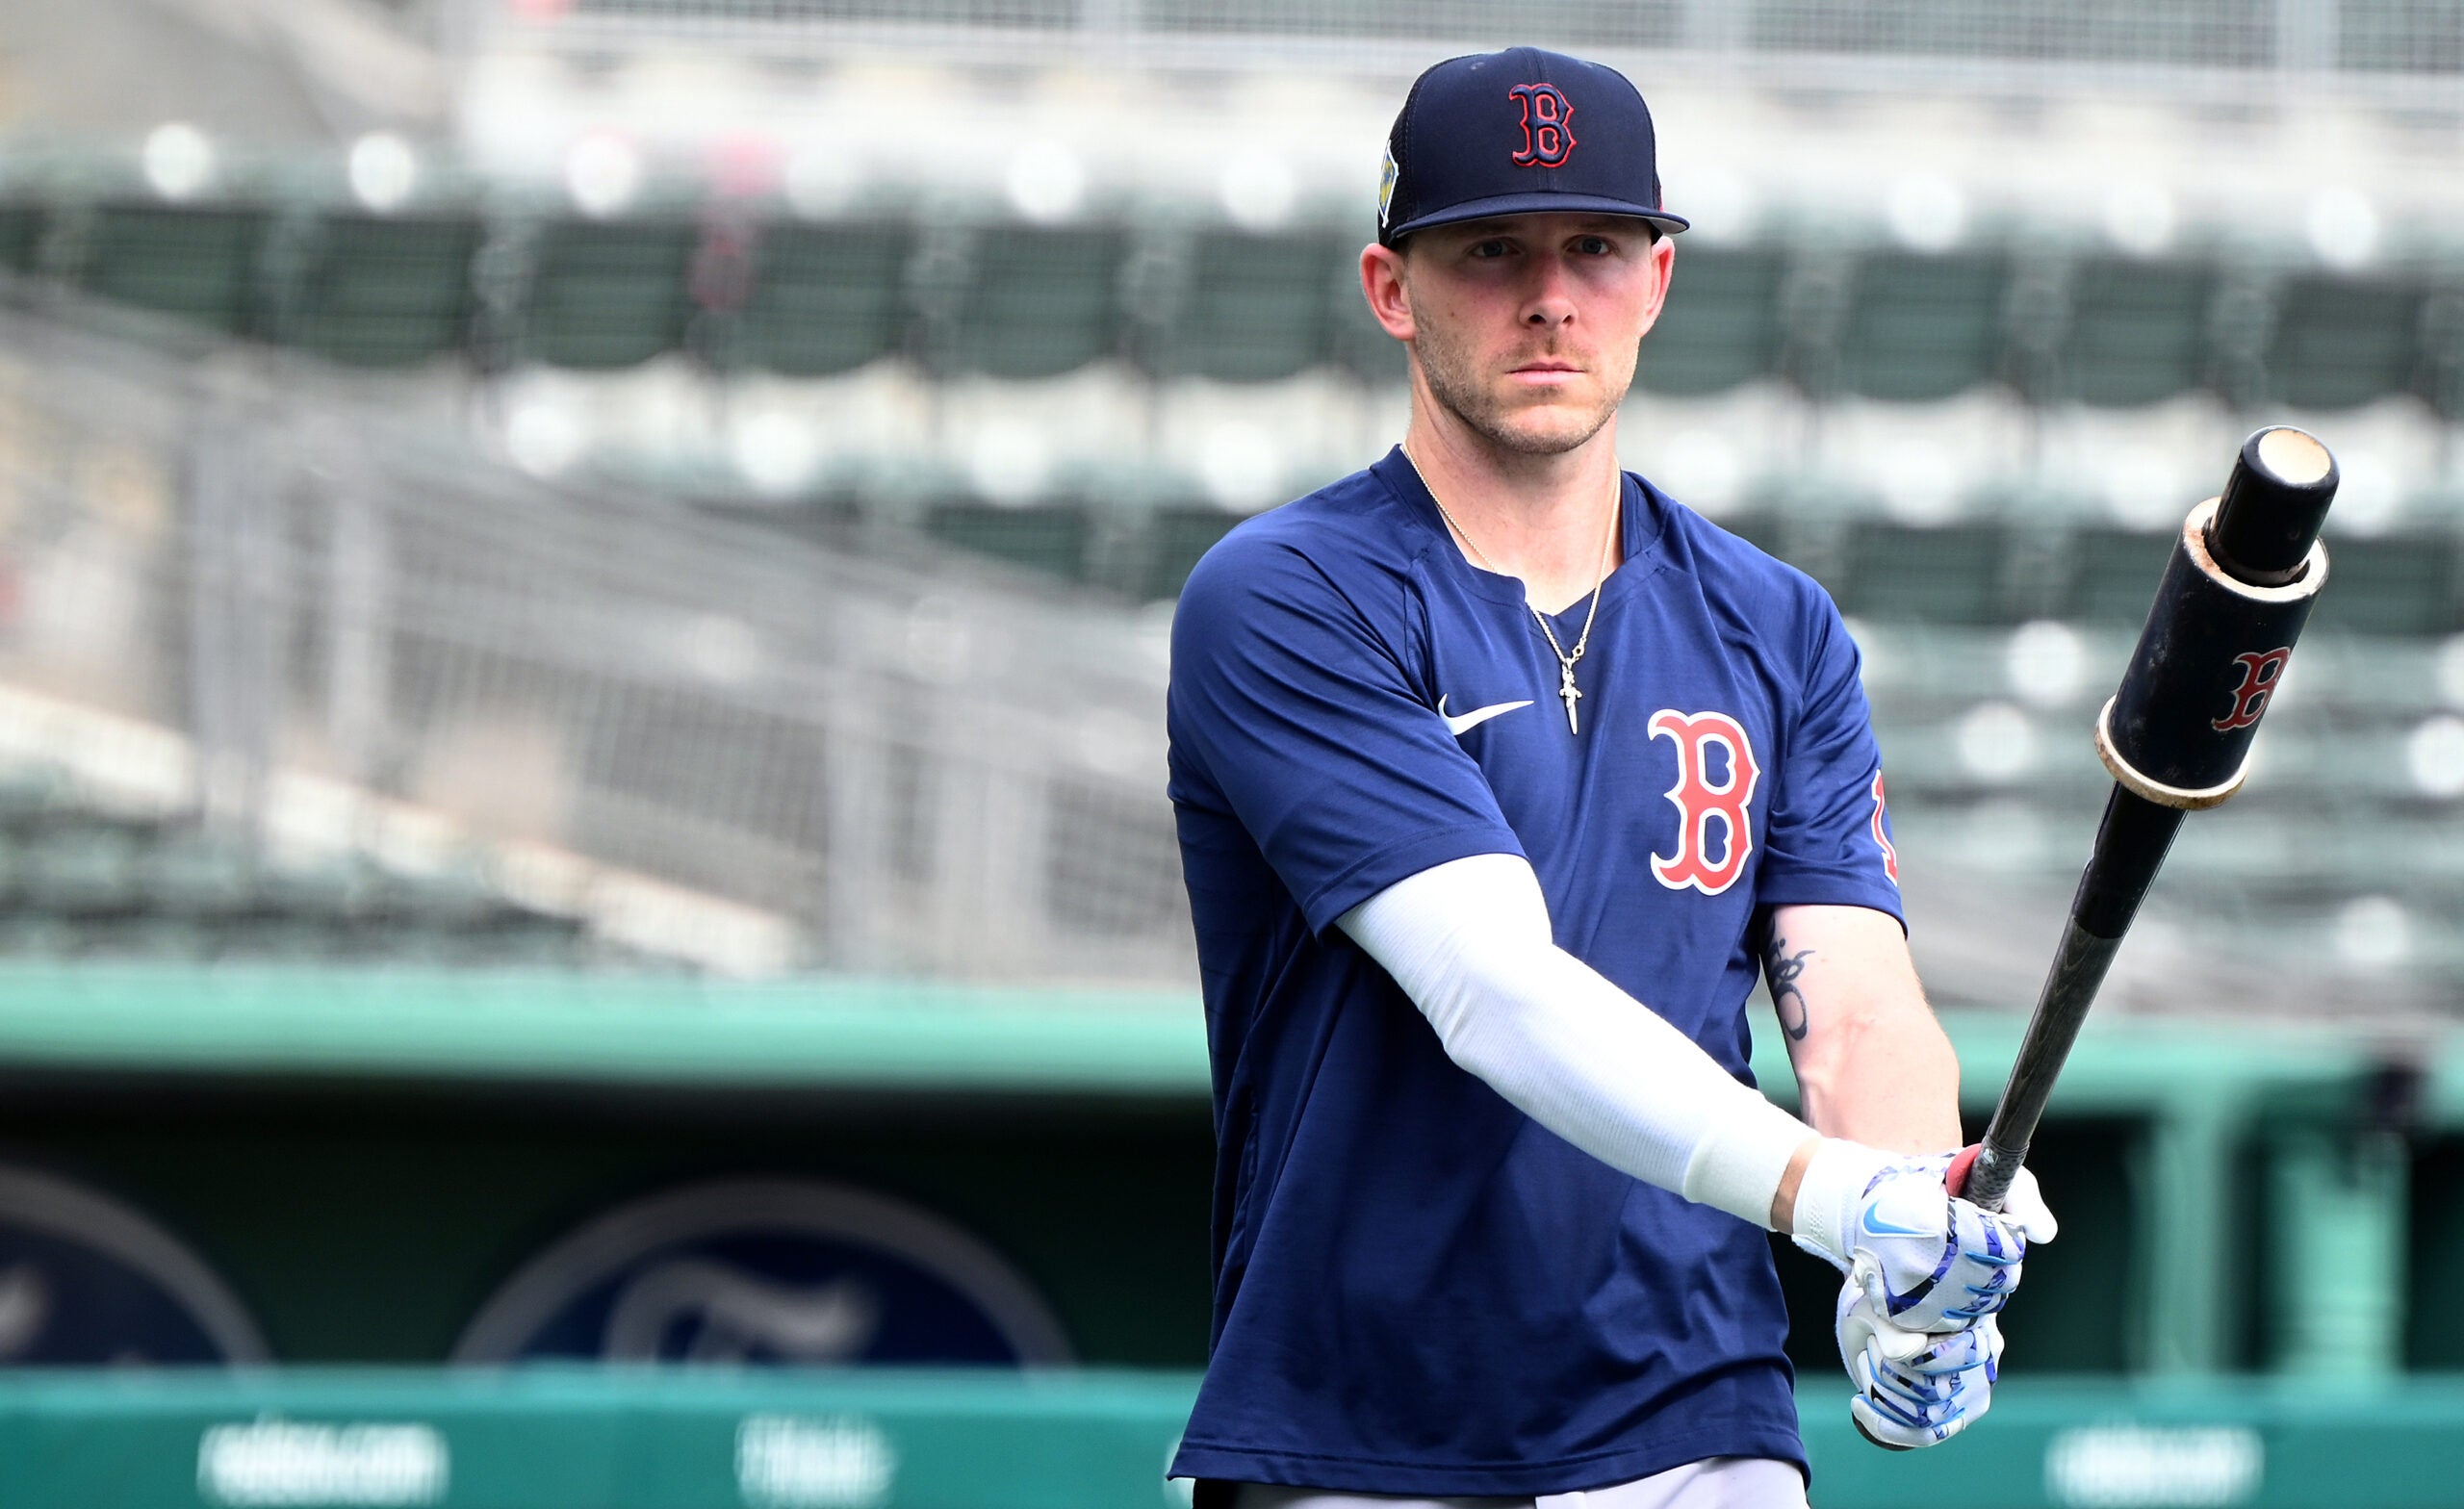 Trevor Story gets RBI single in Boston Red Sox spring debut after